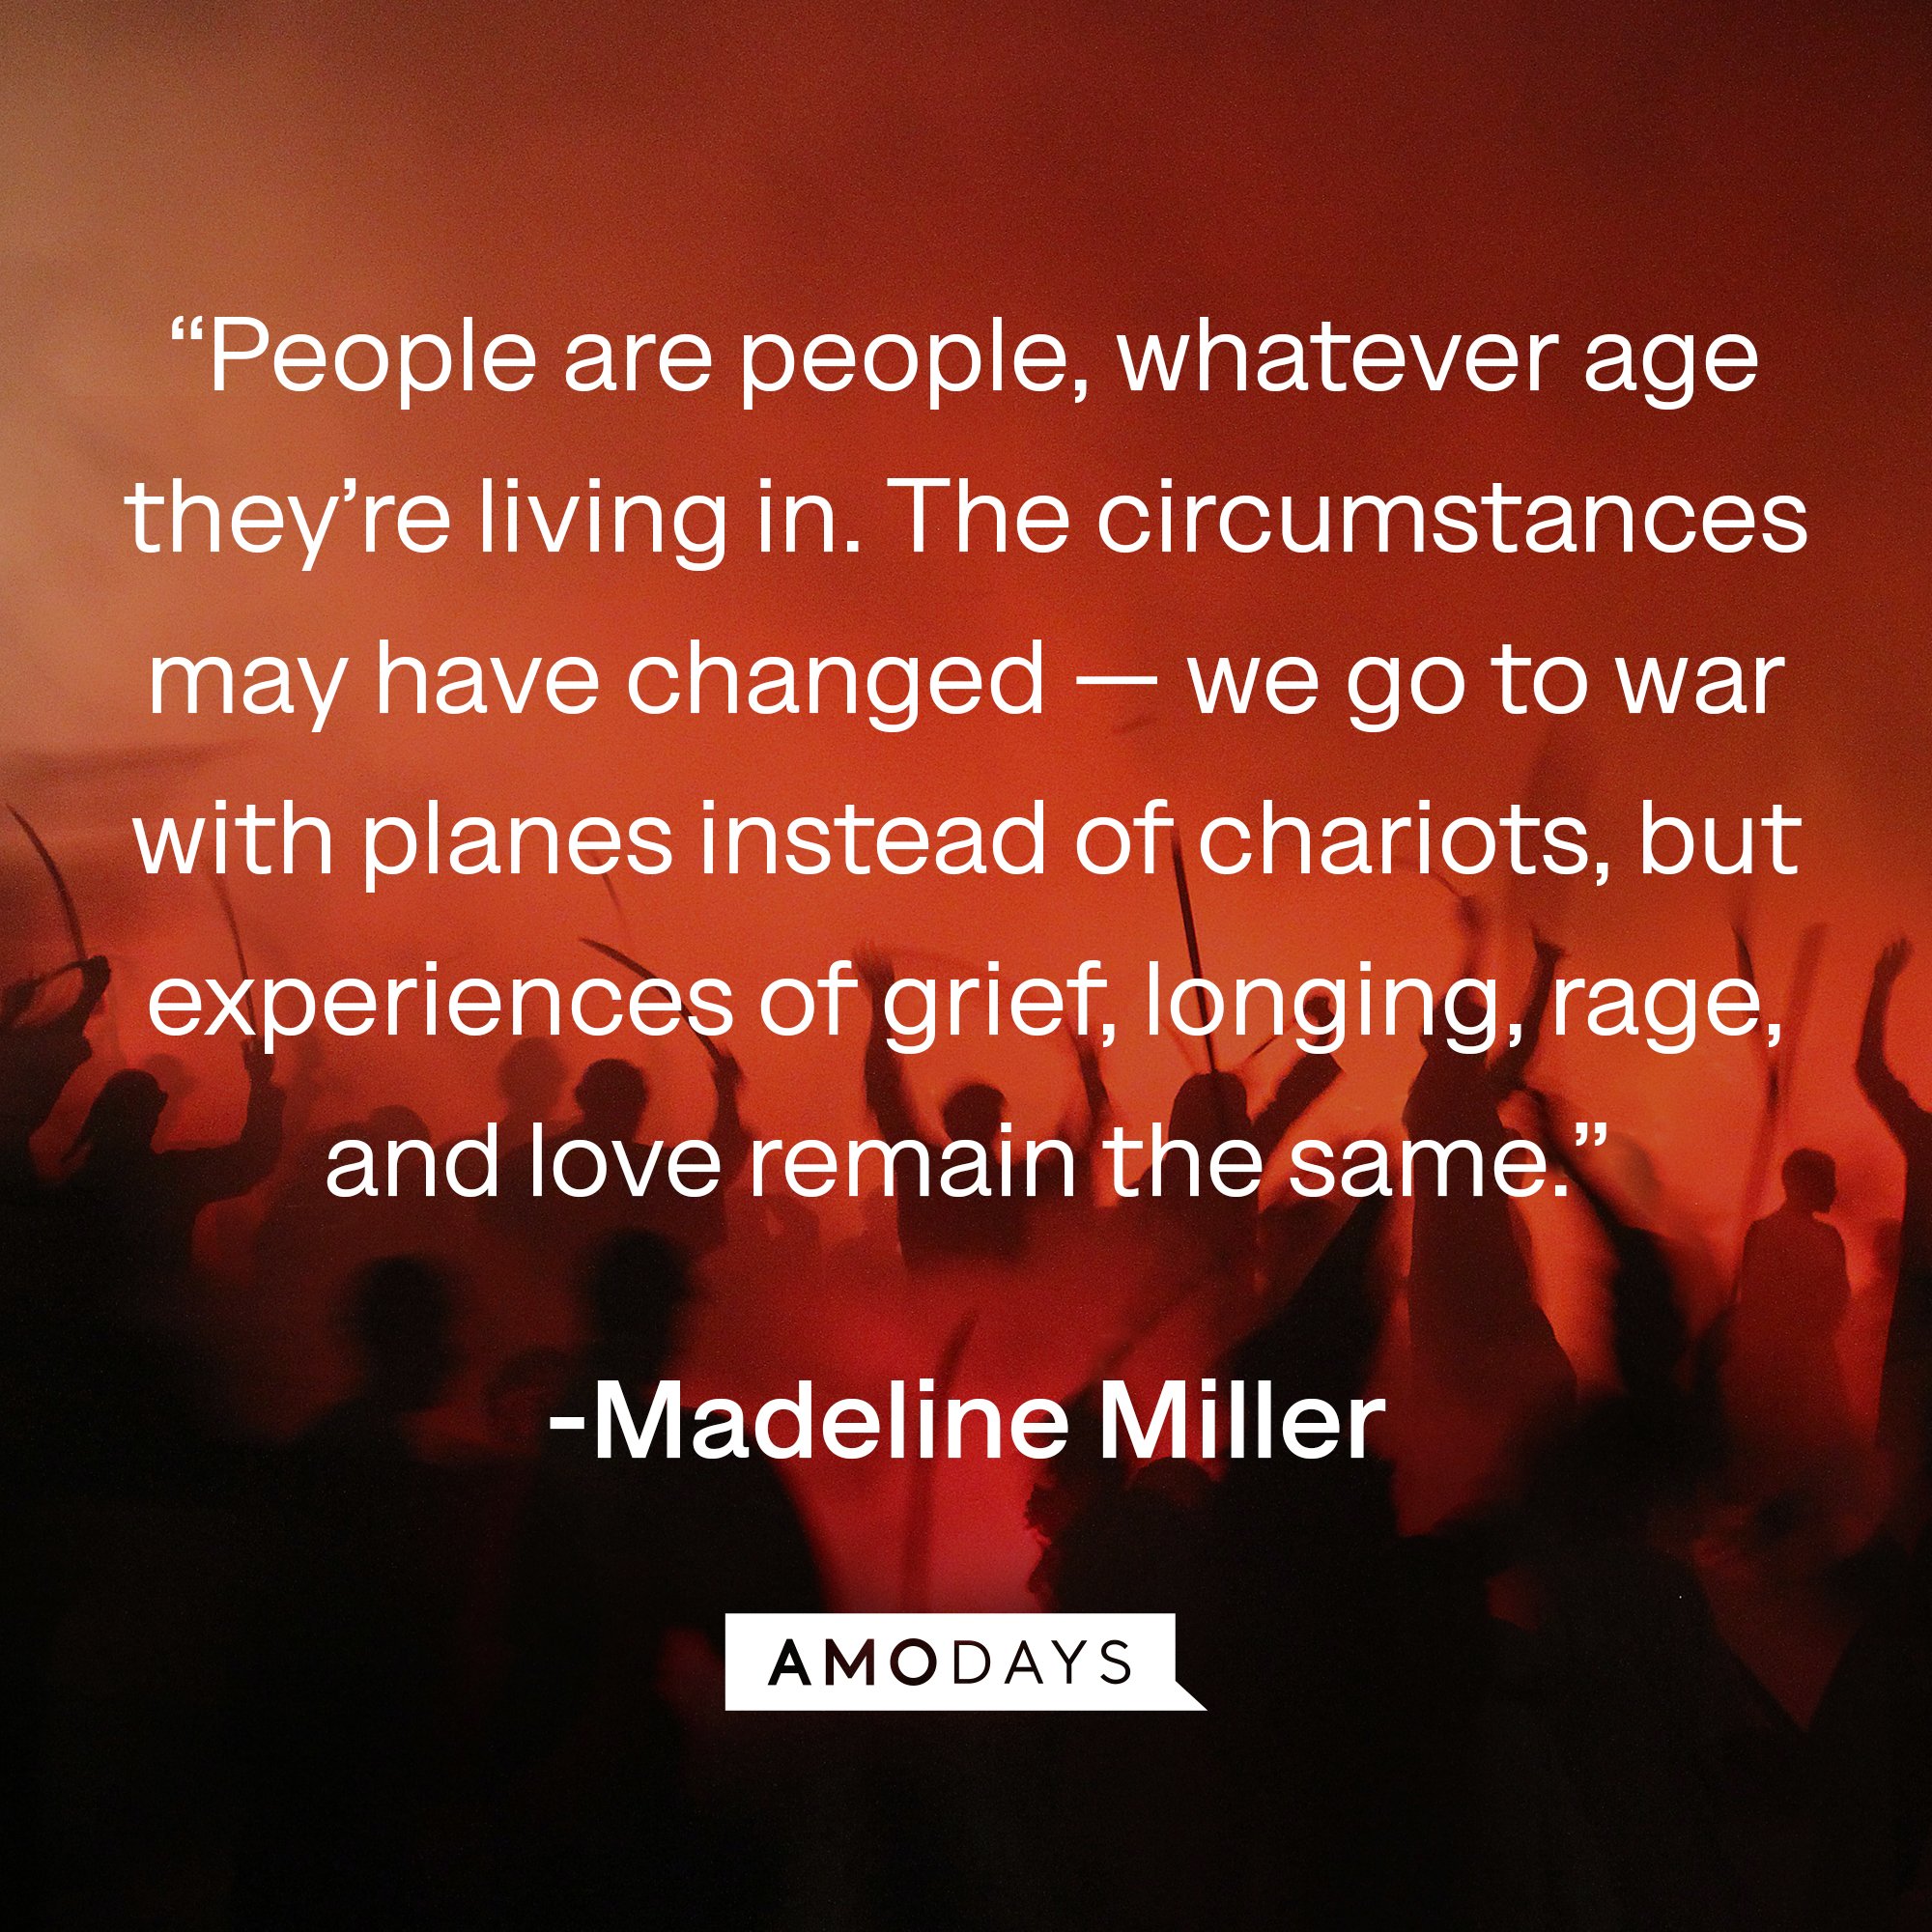 Madeline Miller's quote: “People are people, whatever age they’re living in. The circumstances may have changed — we go to war with planes instead of chariots, but experiences of grief, longing, rage, and love remain the same.” | Image: AmoDays